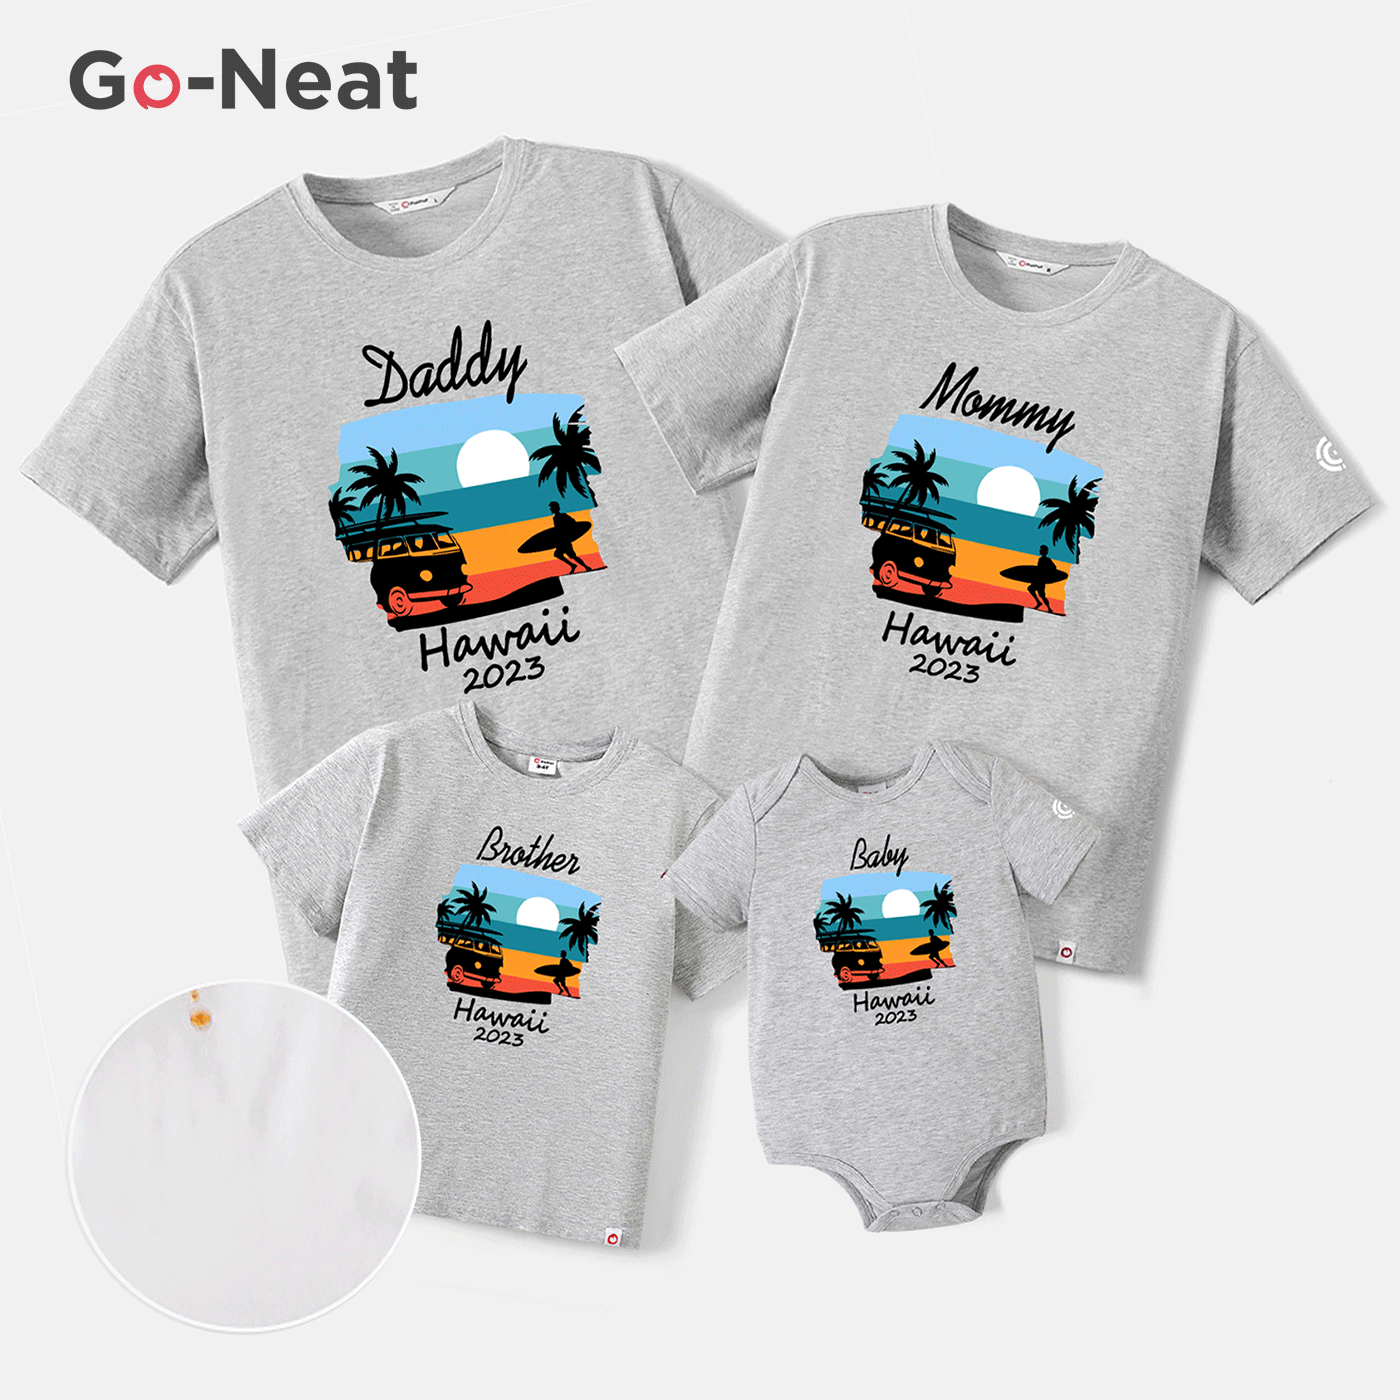 Go-Neat Water Repellent and Stain Resistant Family Matching Graphic Print Short-sleeve Tee